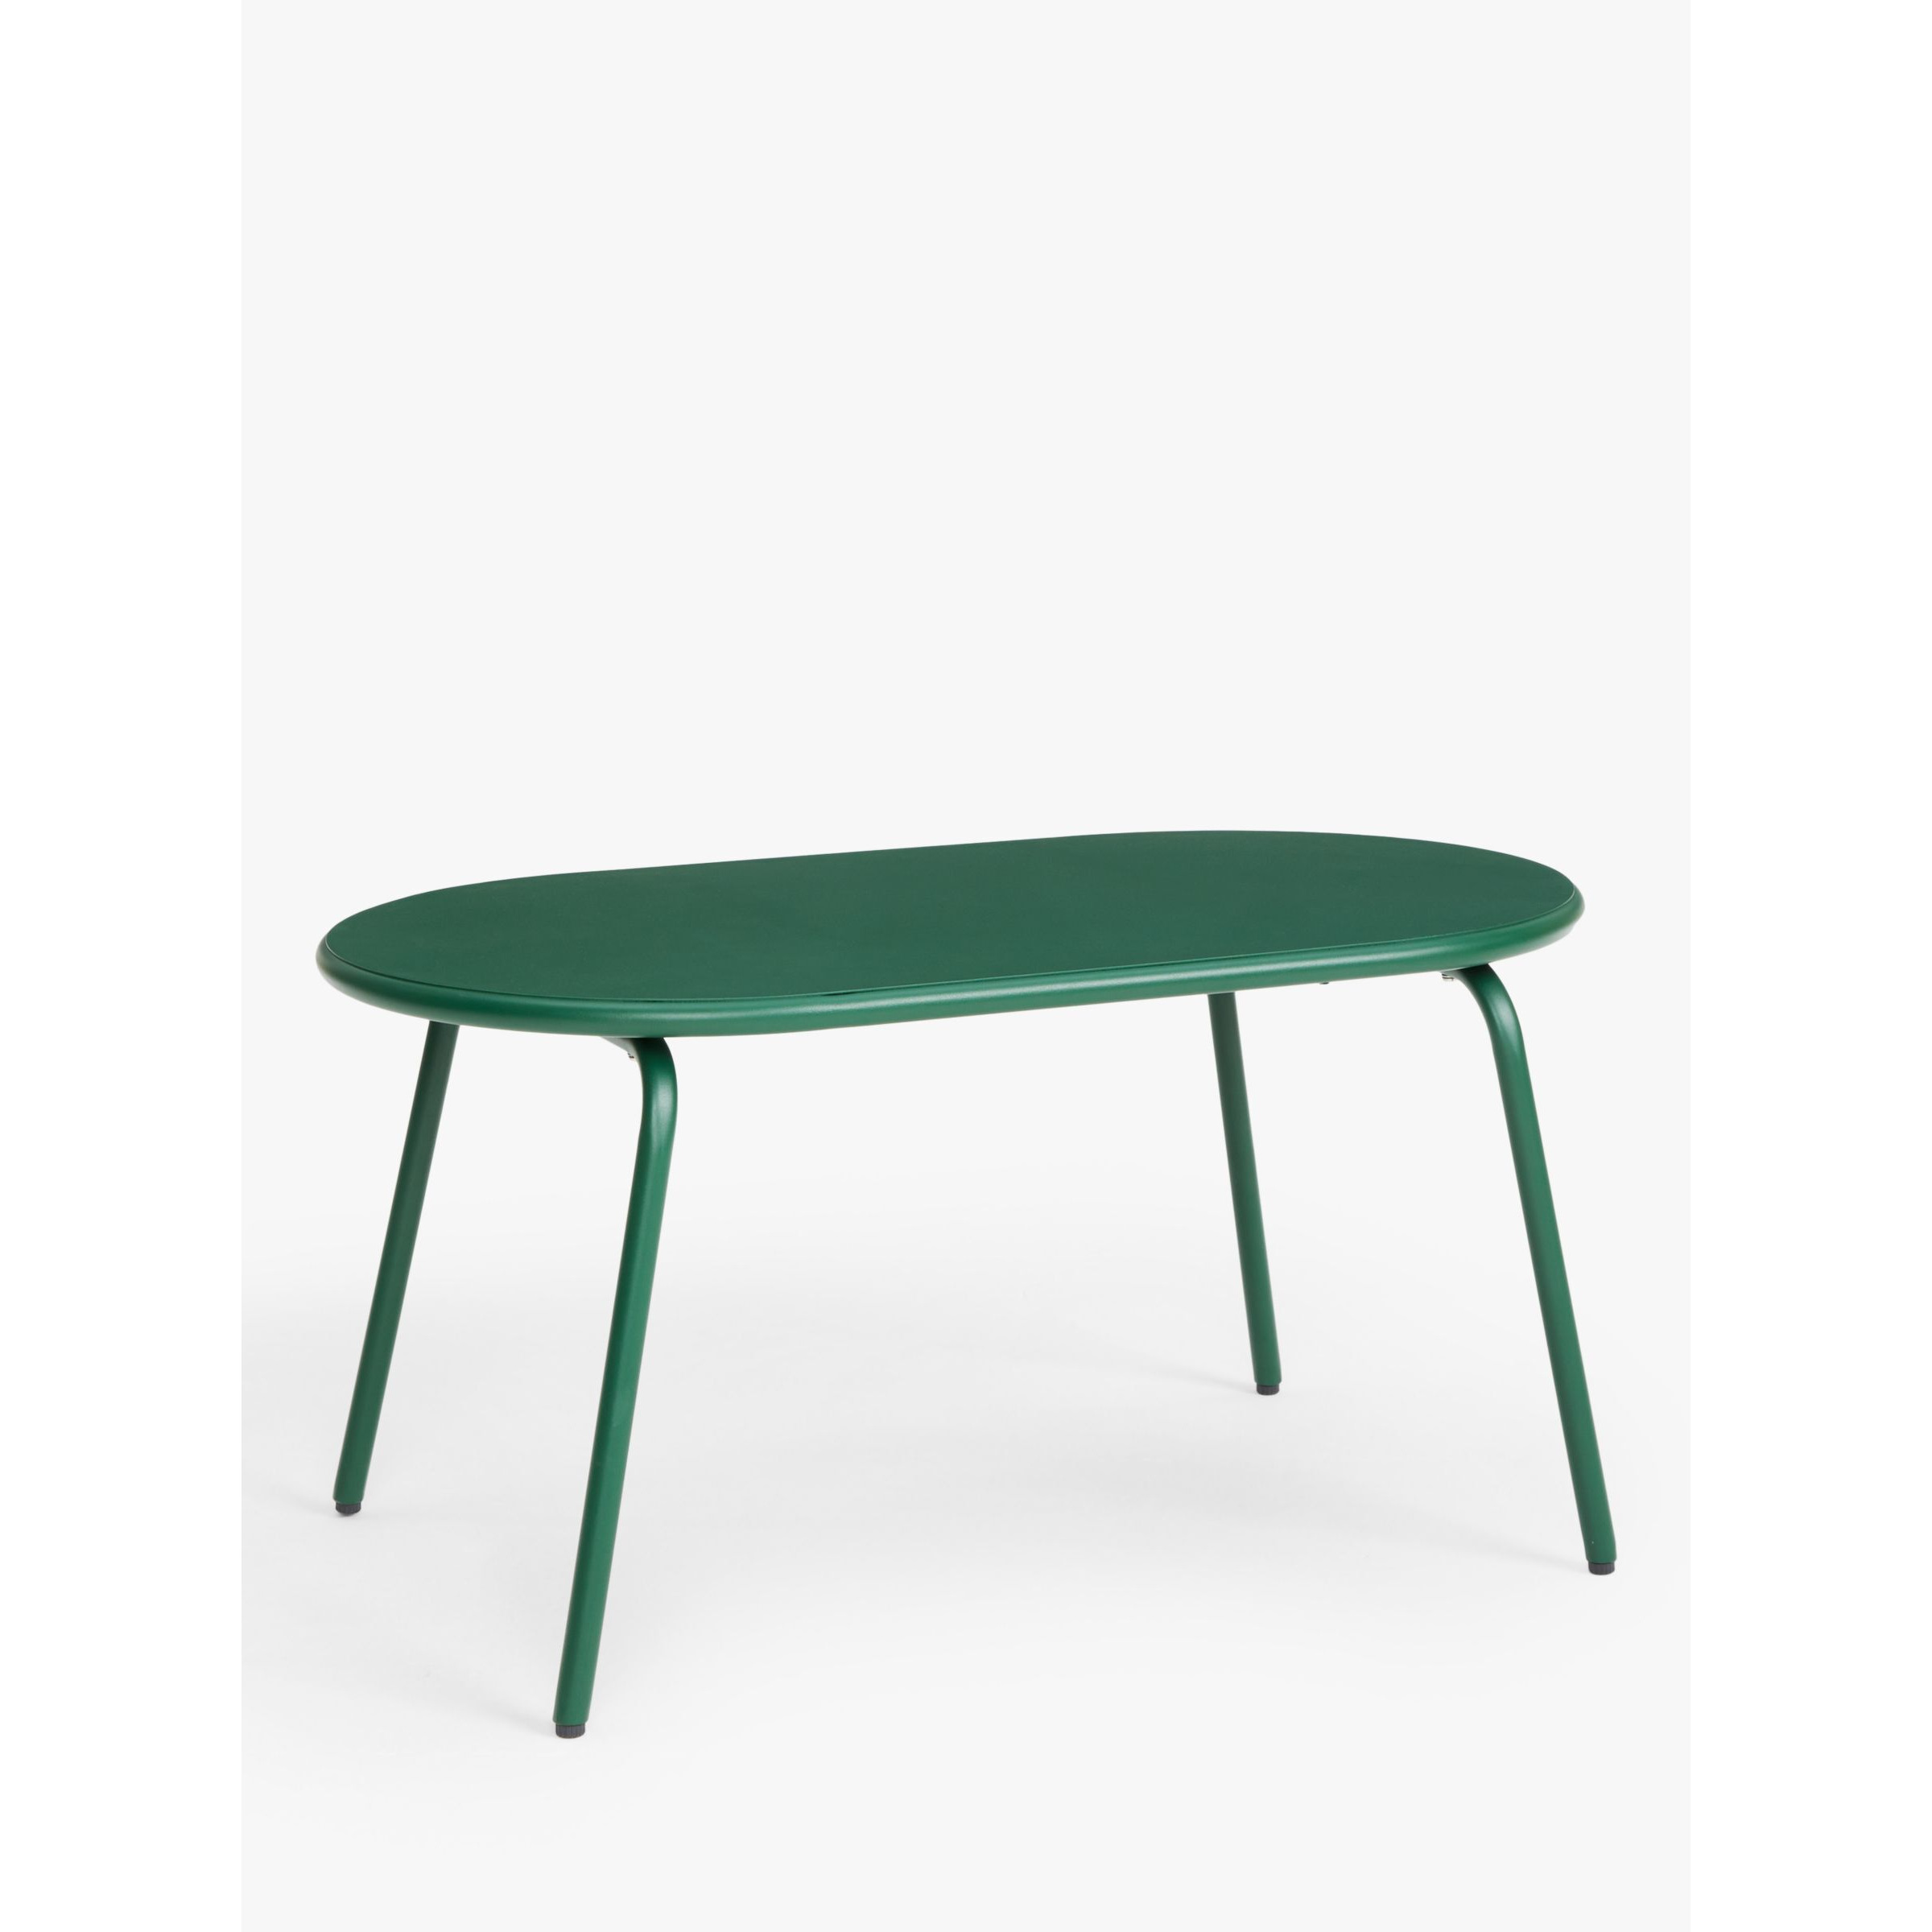 John Lewis ANYDAY Oval Metal Garden Coffee Table, 90cm - image 1